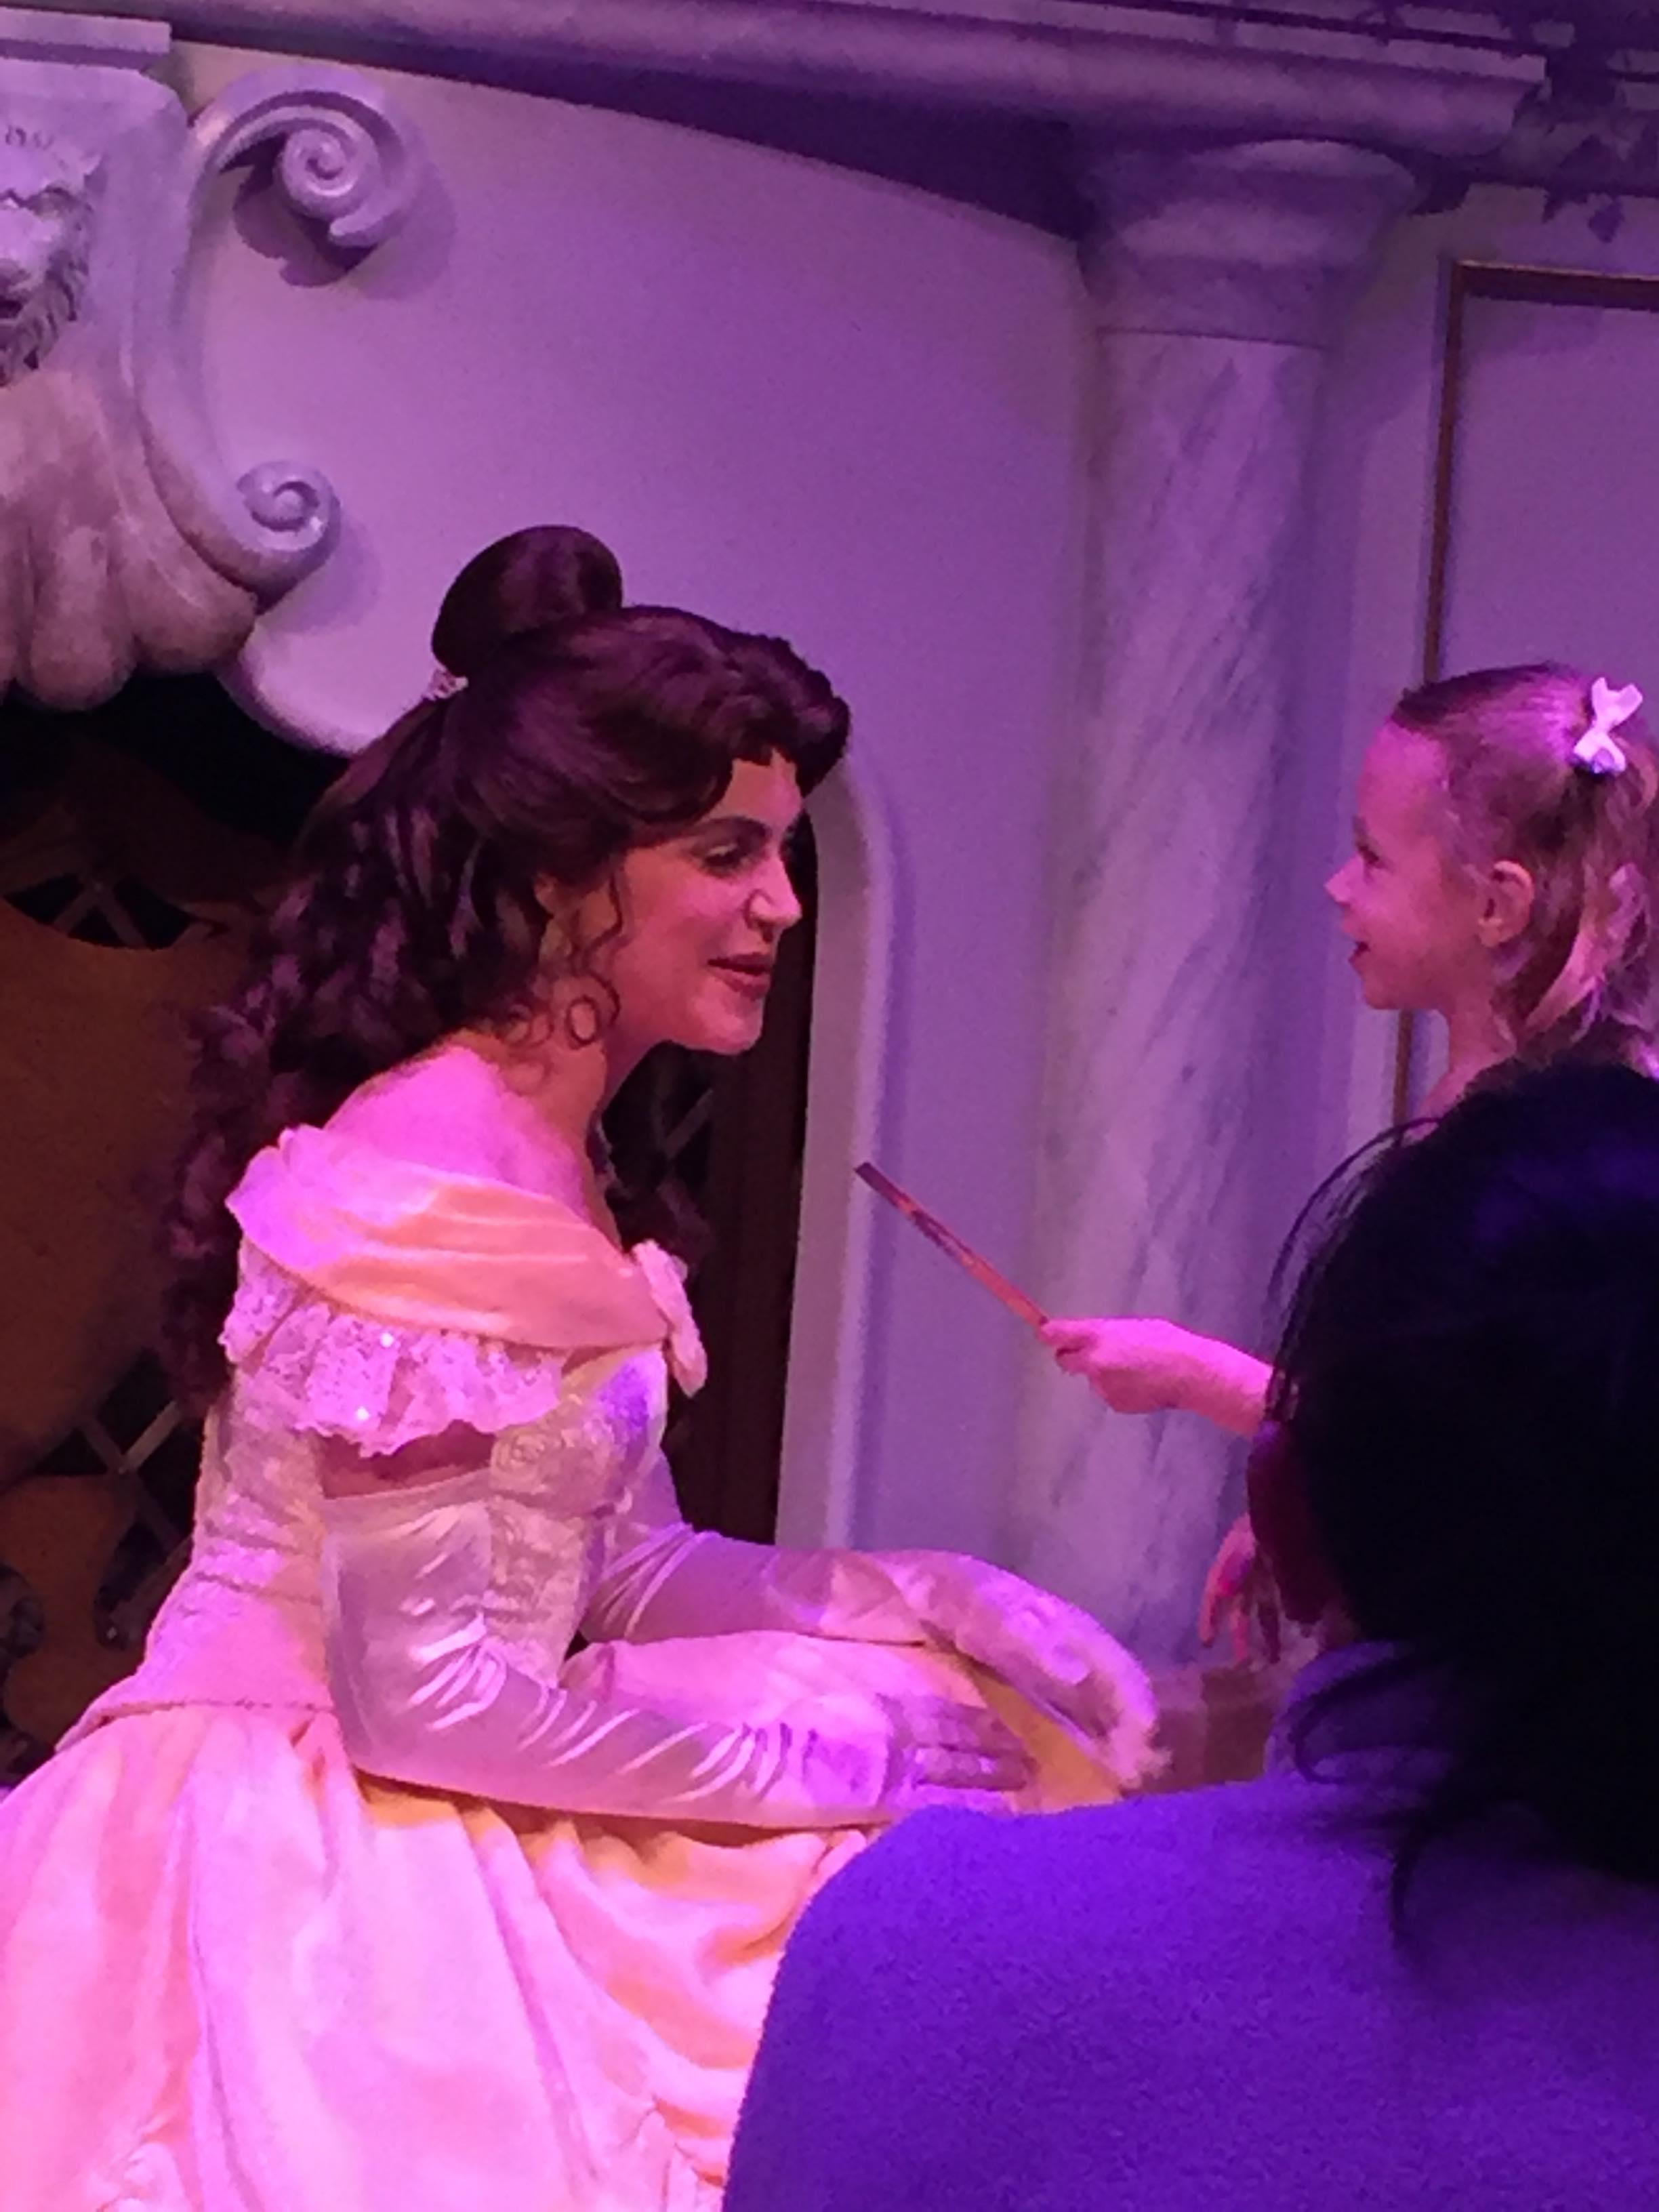 Just talking with Belle from Beauty and the Beast